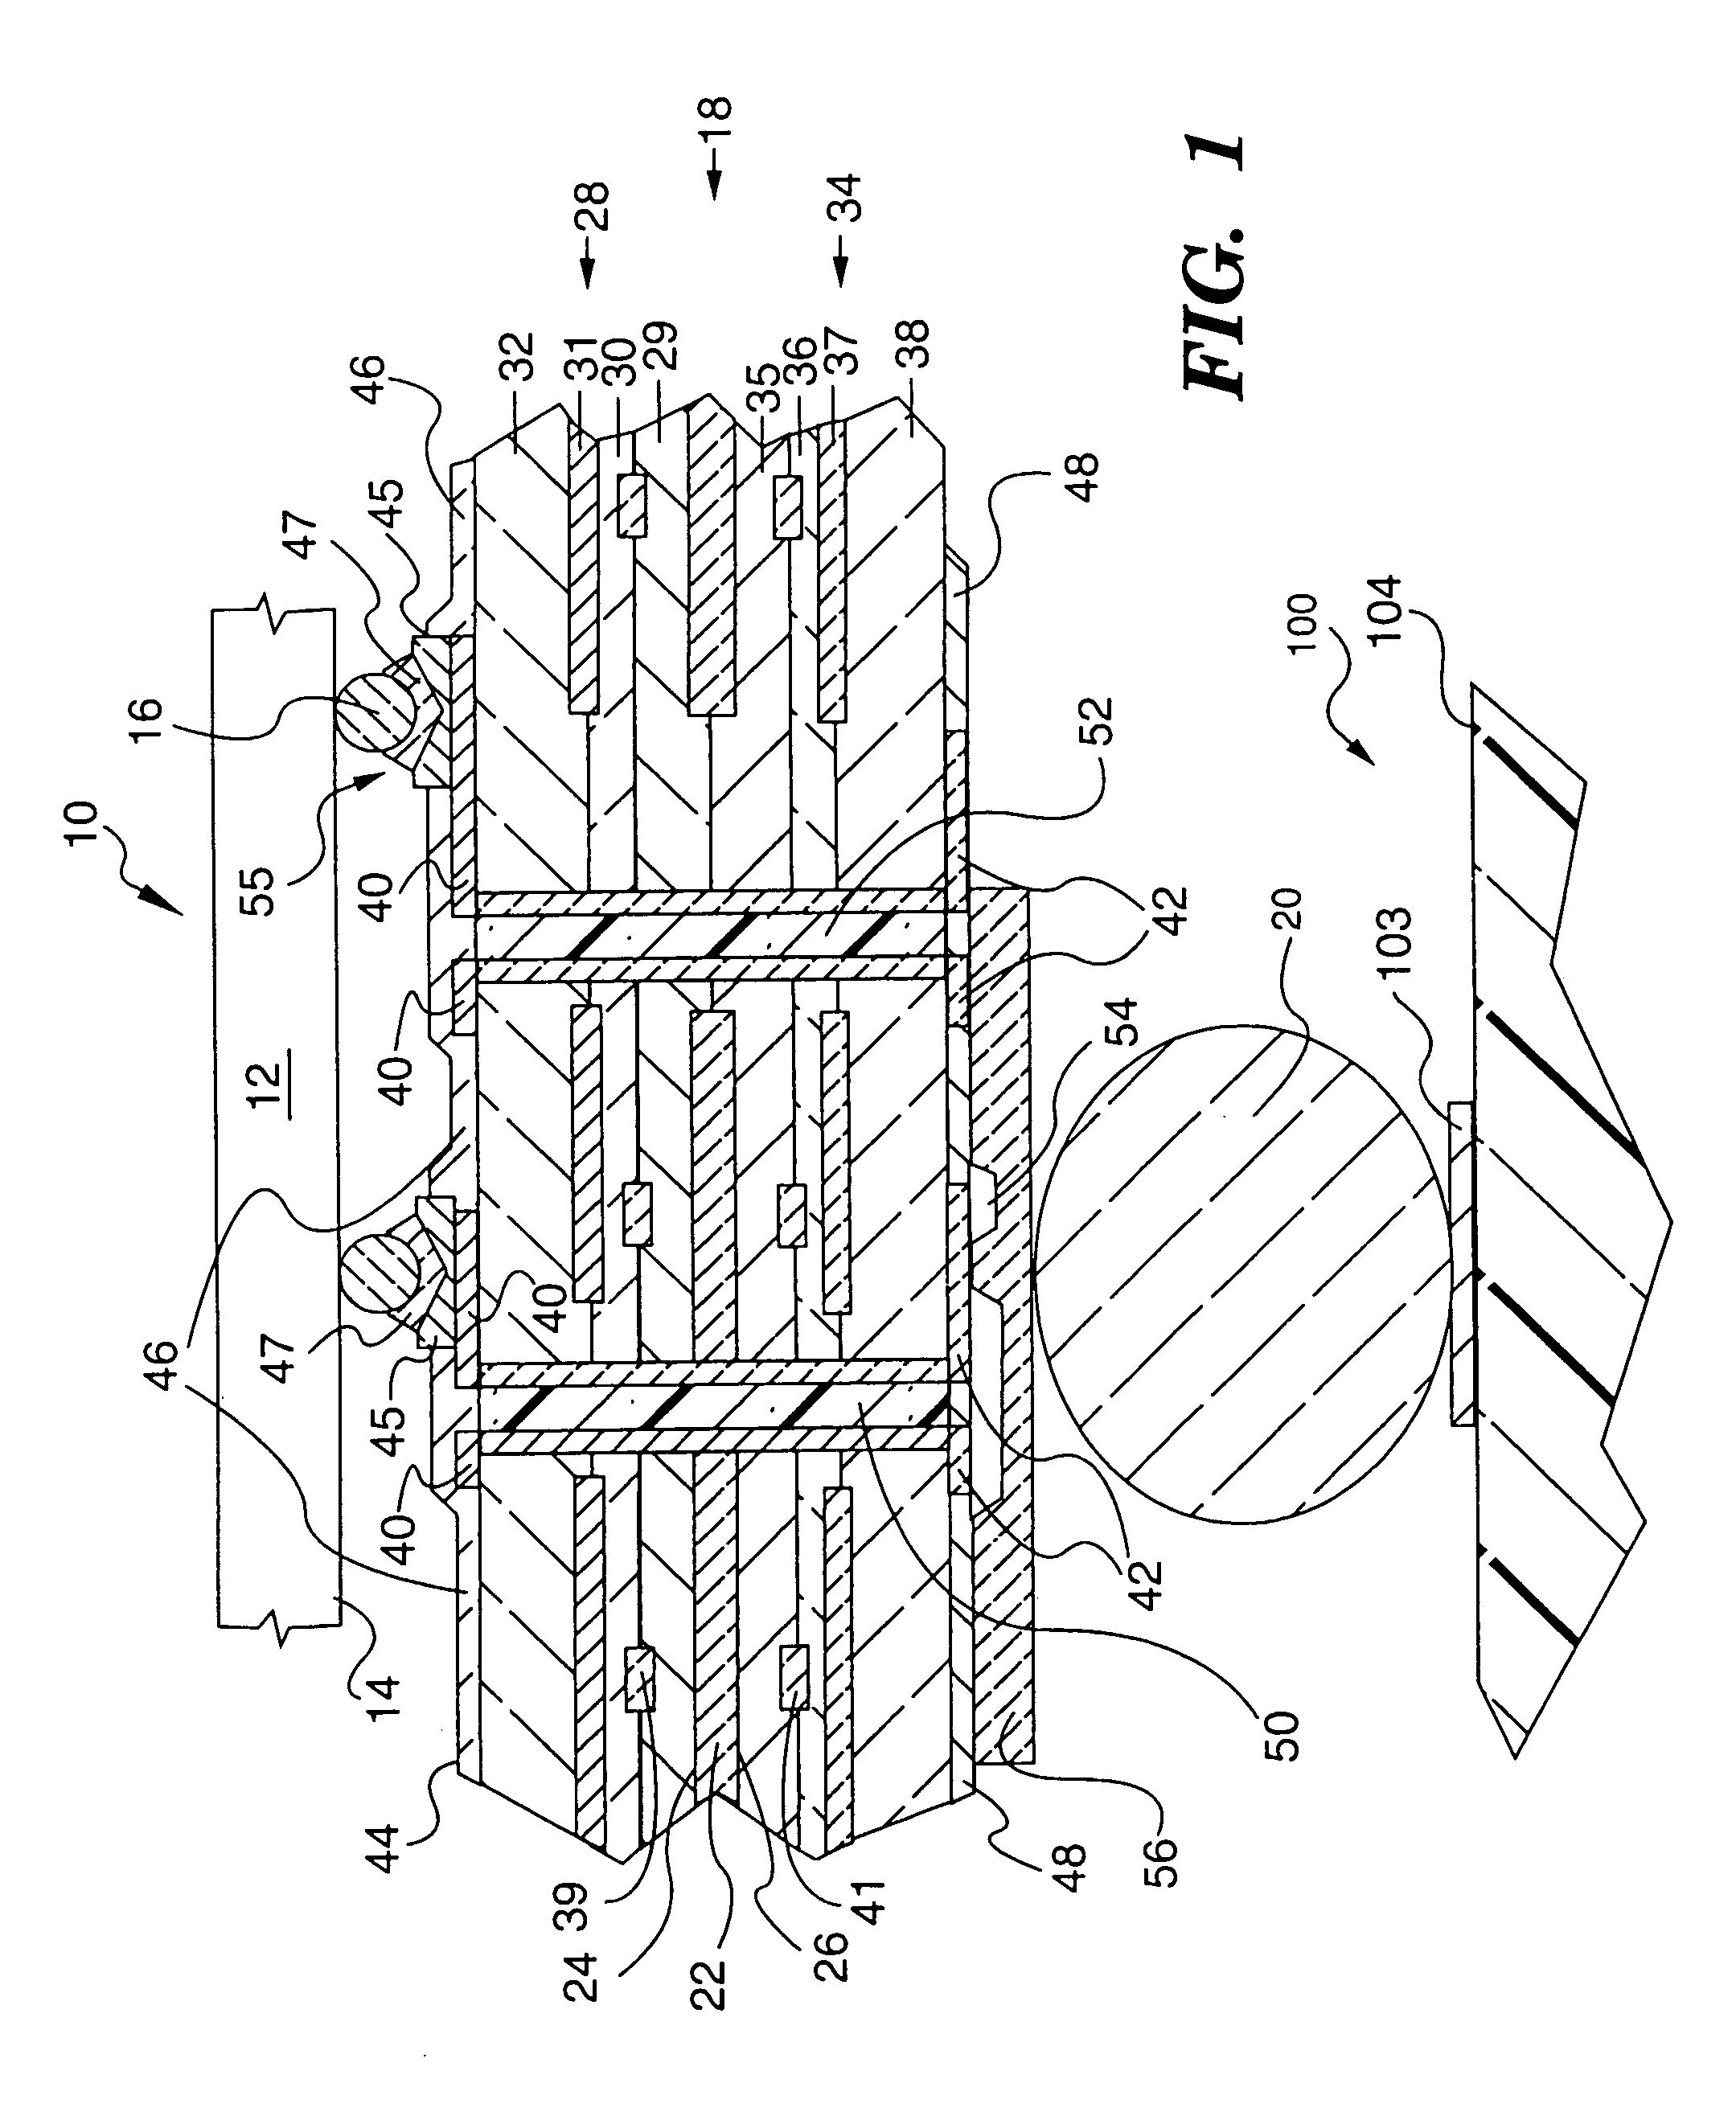 Electronic package with optimized lamination process